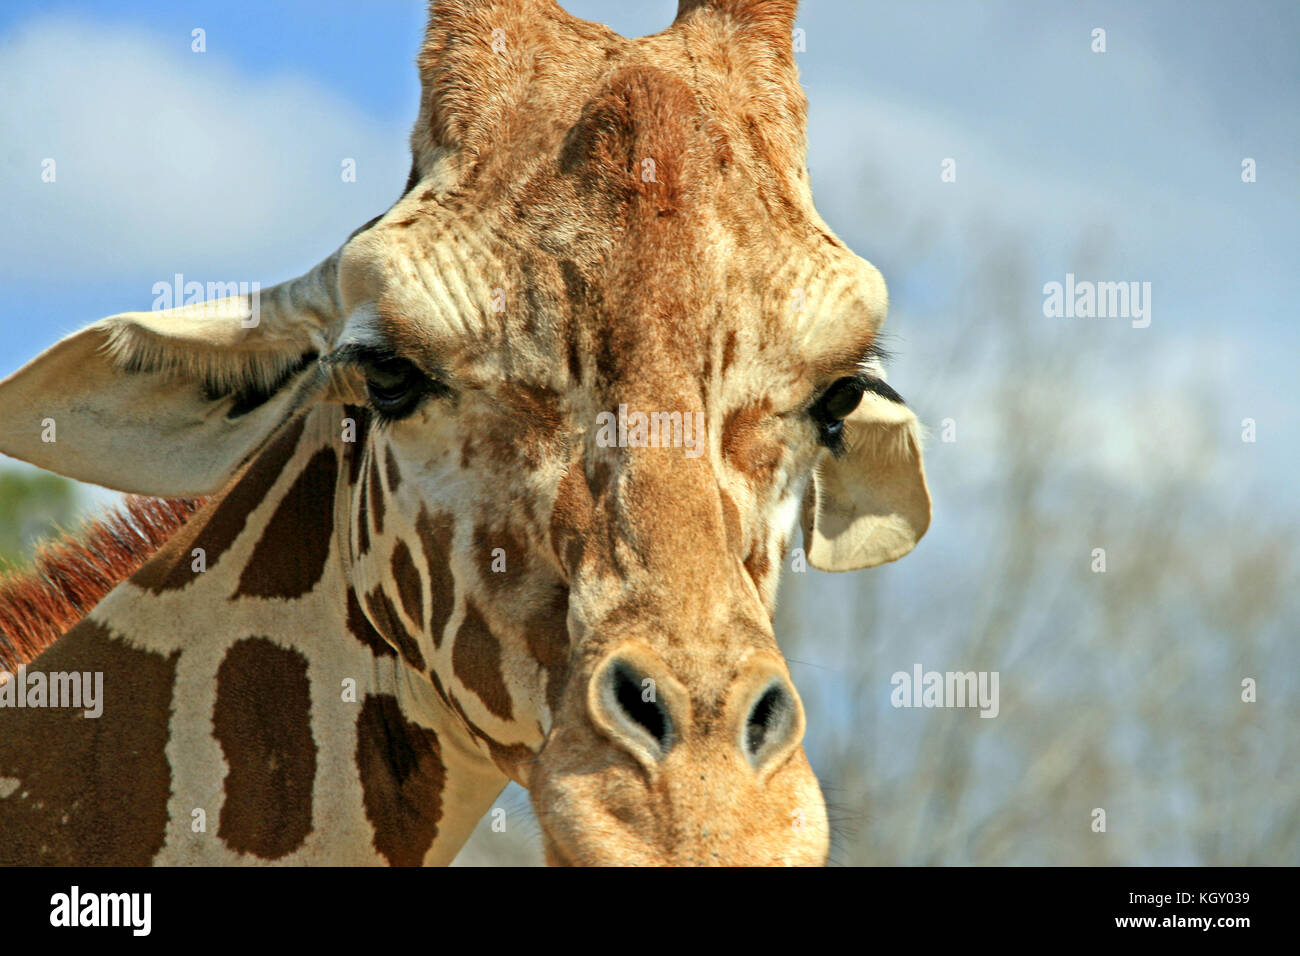 Well Hello there Giraffe face close up Stock Photo